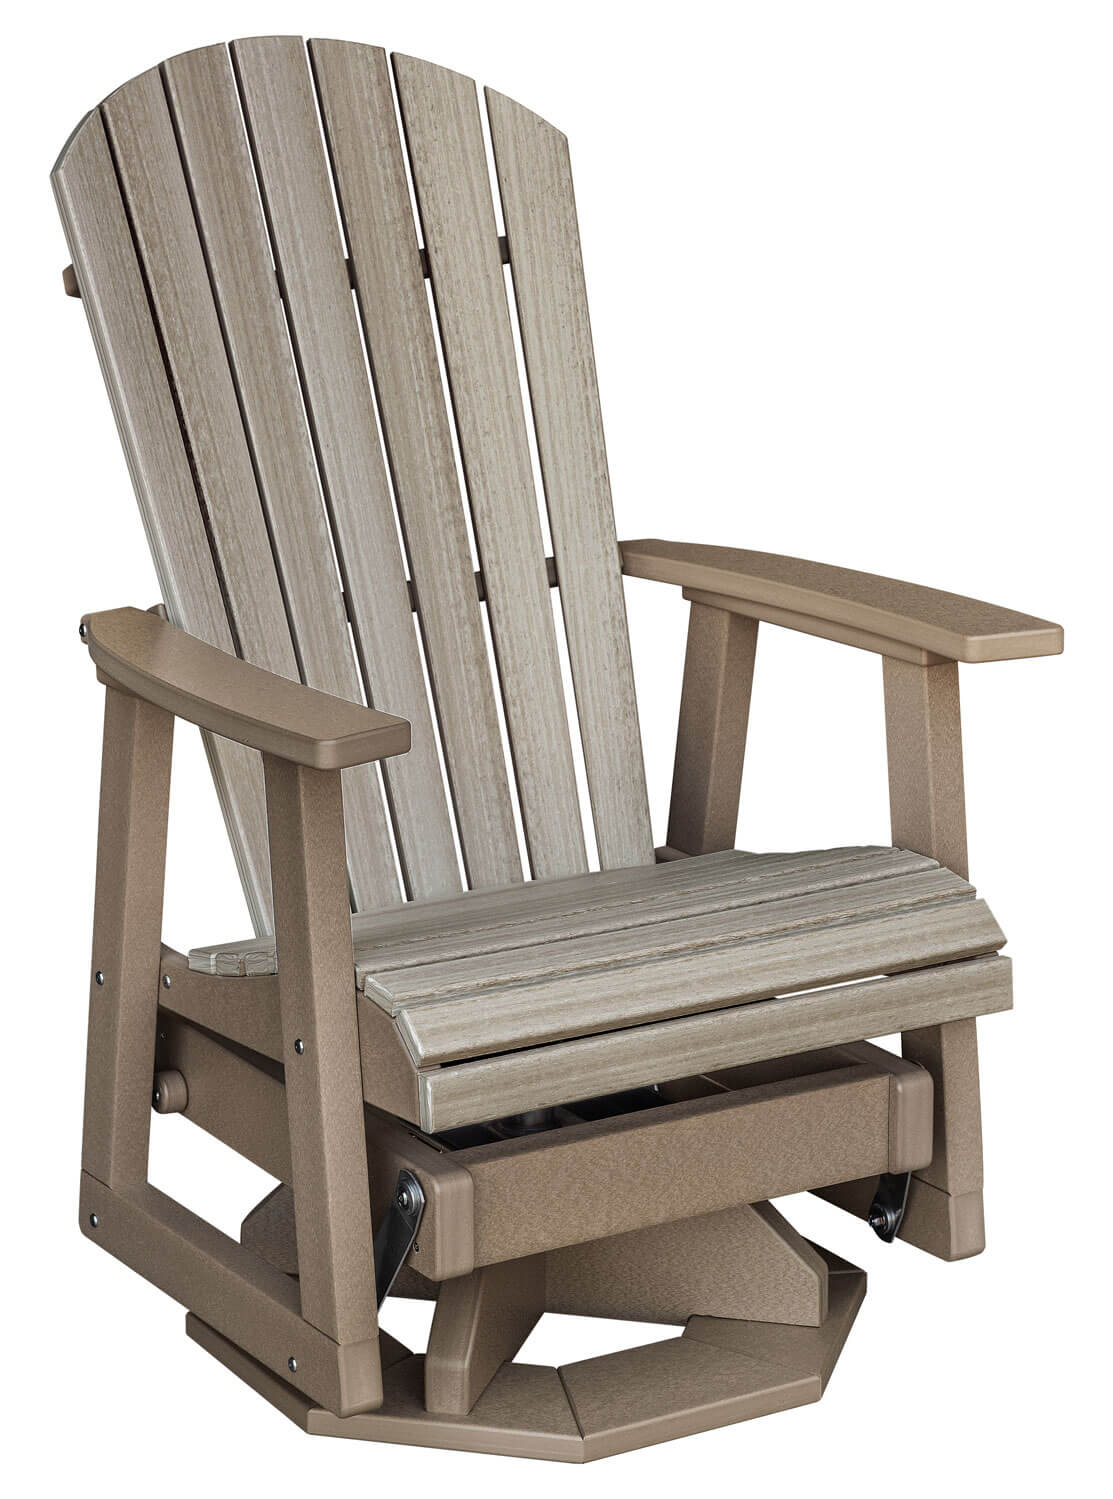 EC Woods EZ Glide Outdoor Poly Swivel Glider Shown in Seashell and Weathered Wood